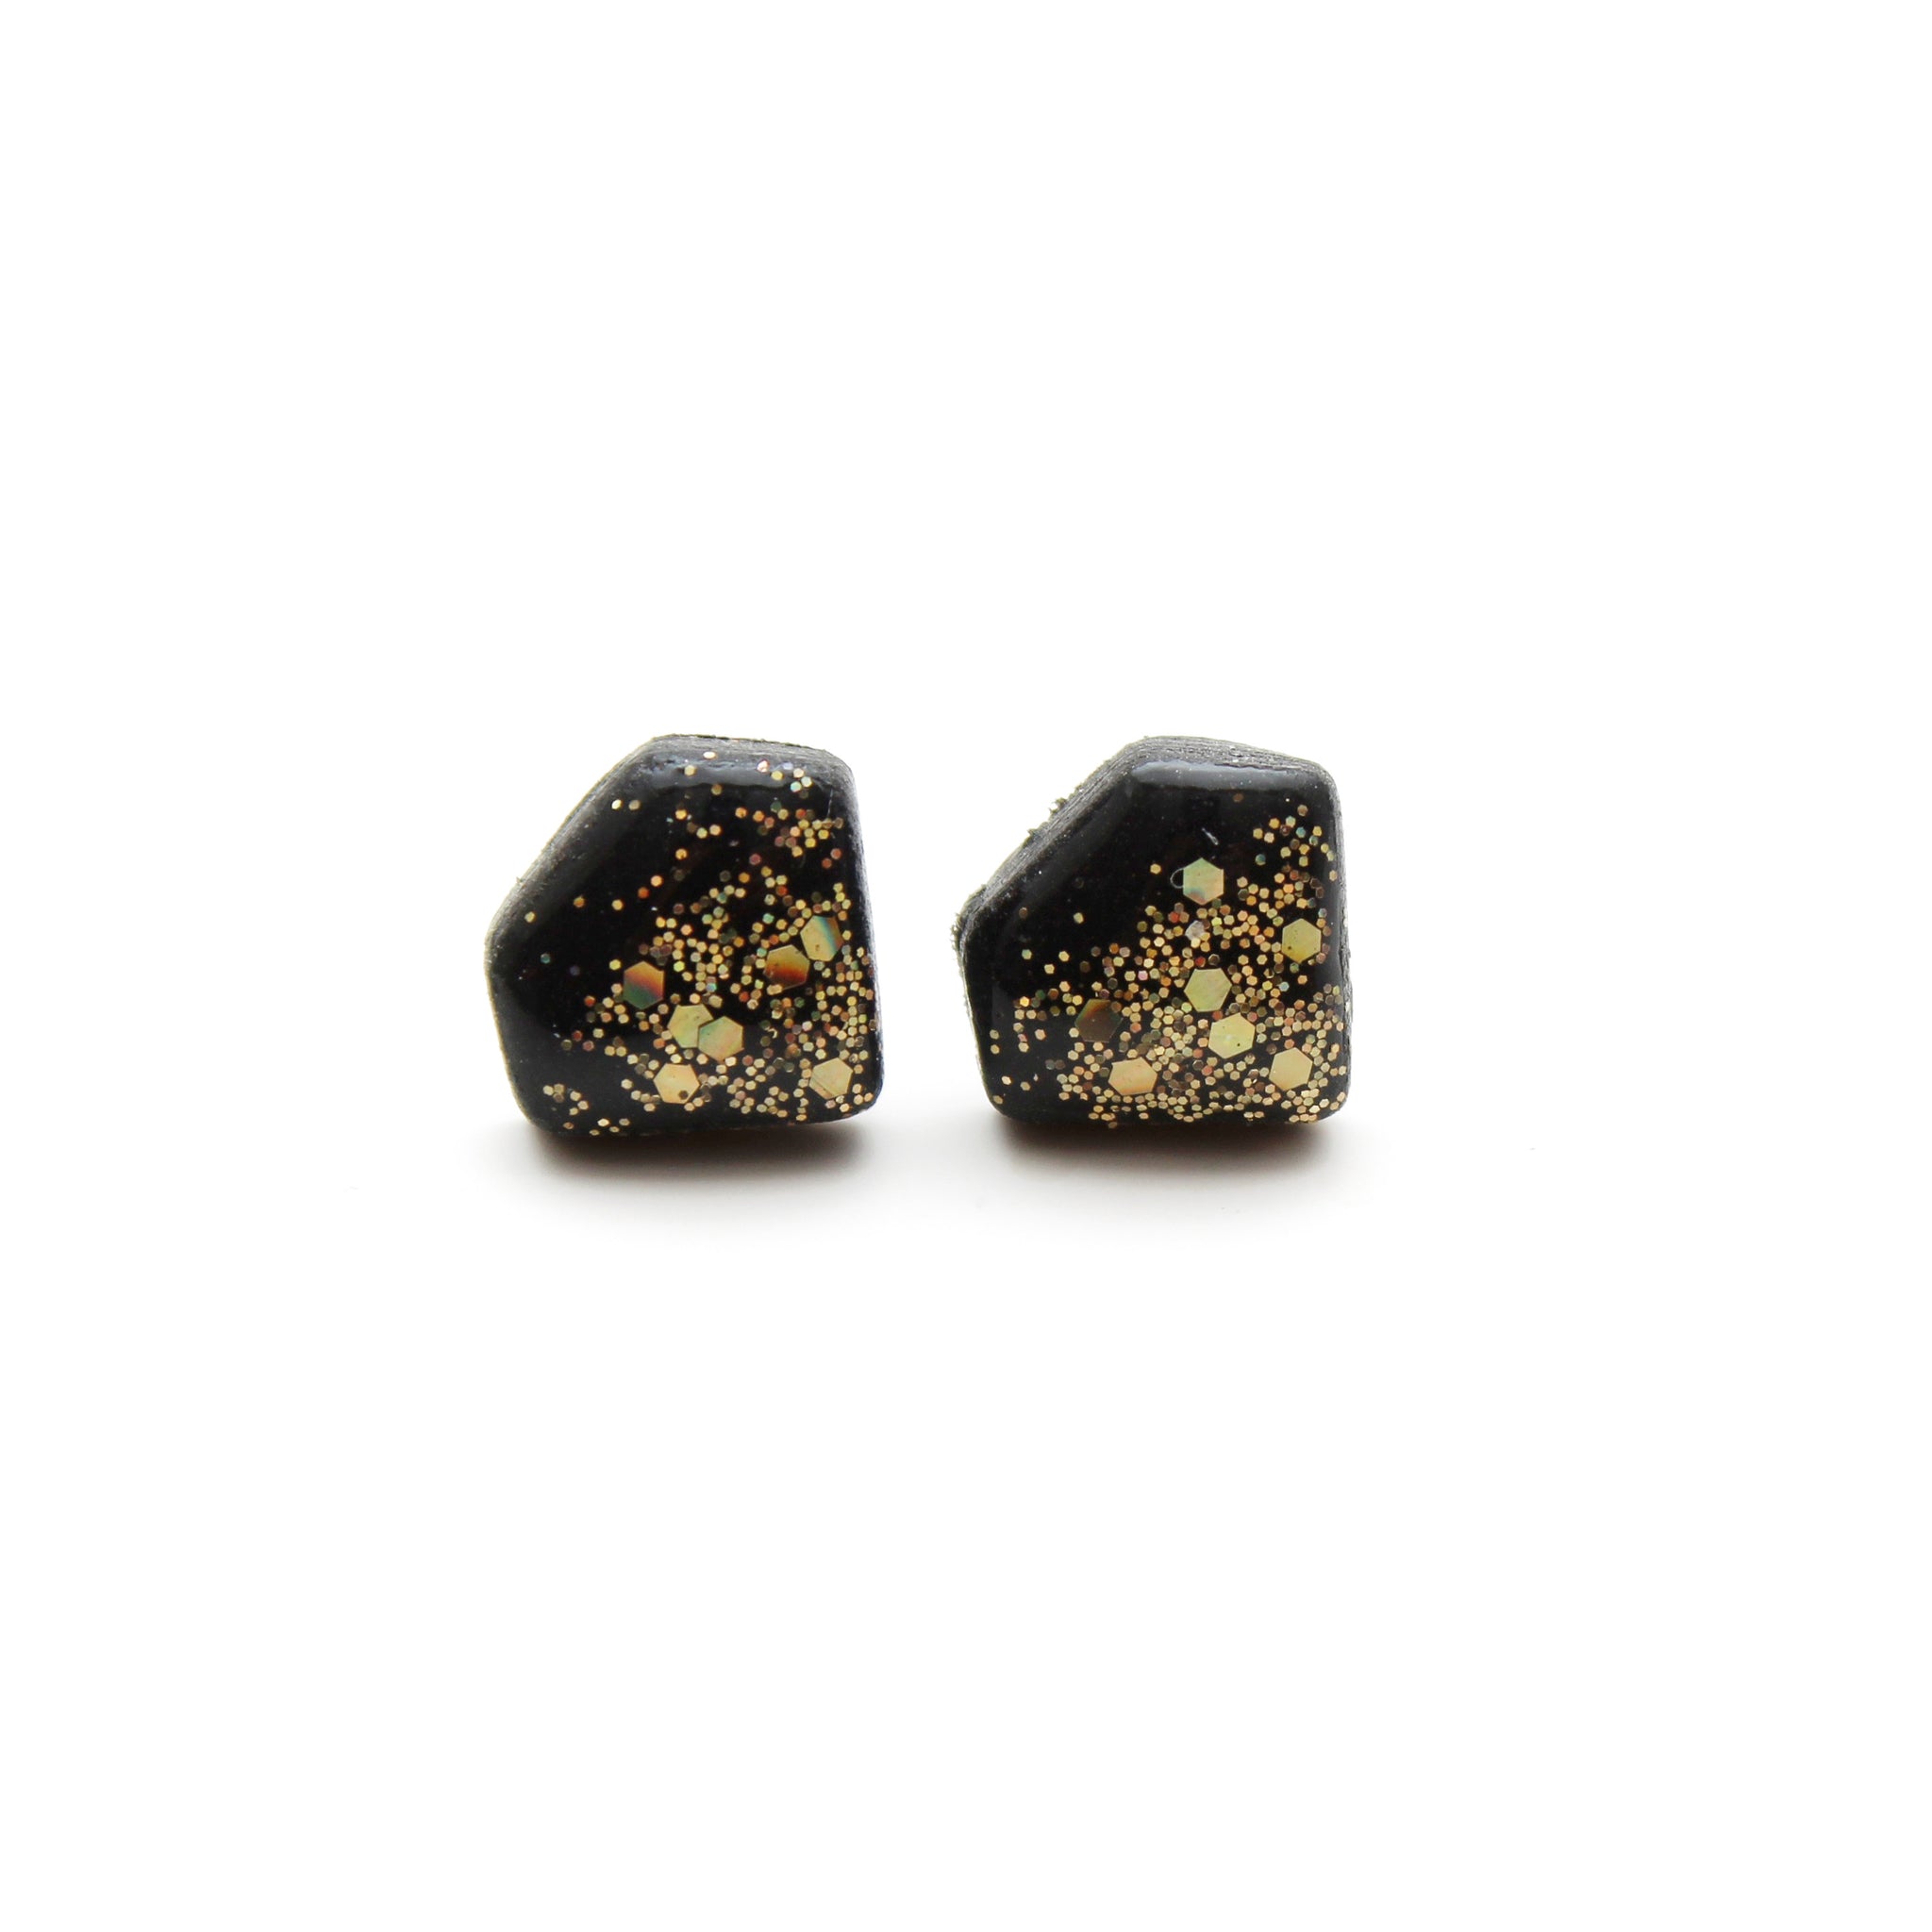 Black and Gold Holographic Glitter Gem Stud Earrings